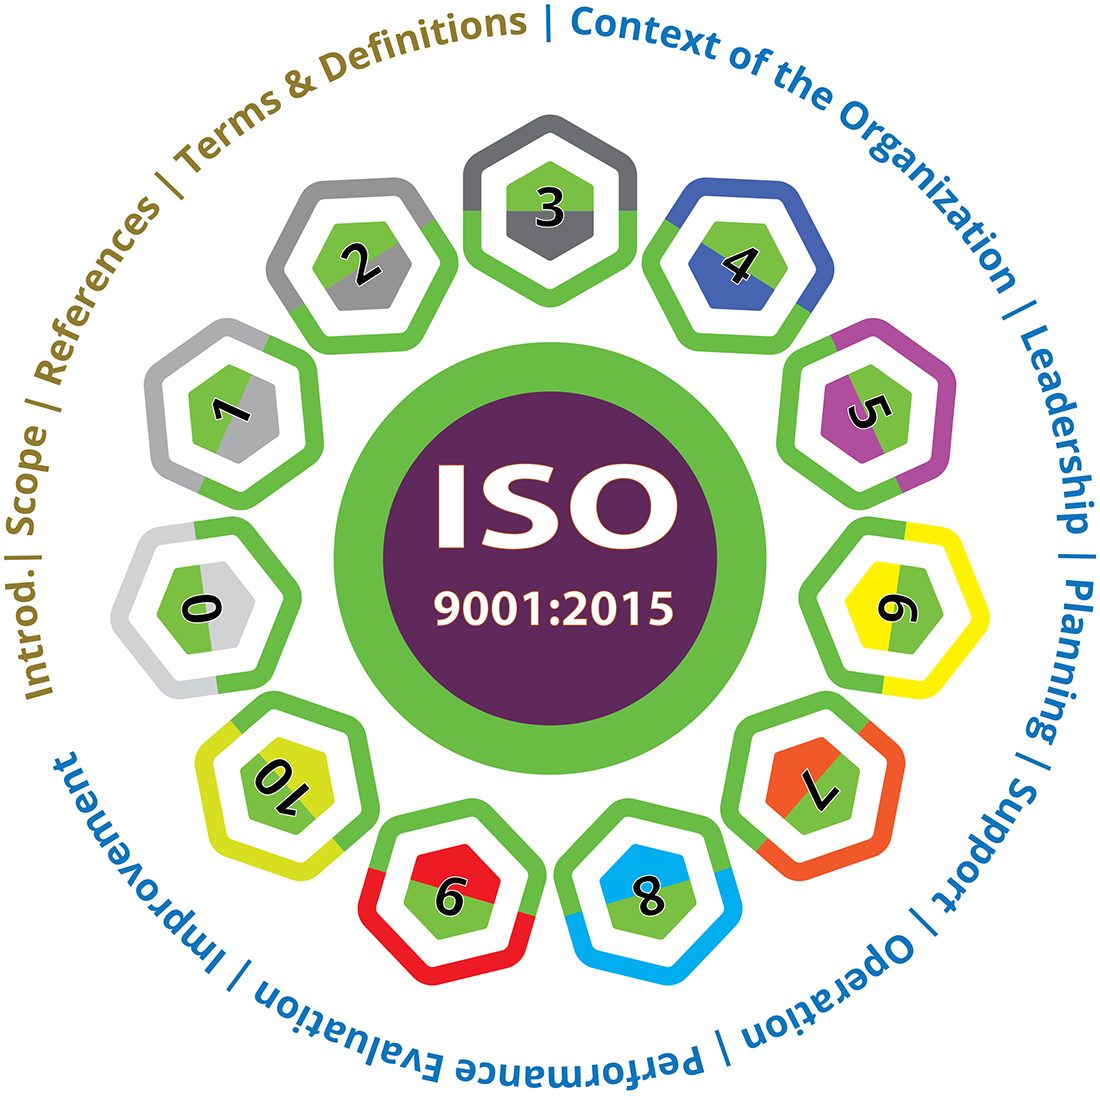 ISO 9001:2015 Terms and Definitions design, fully editable preview image.